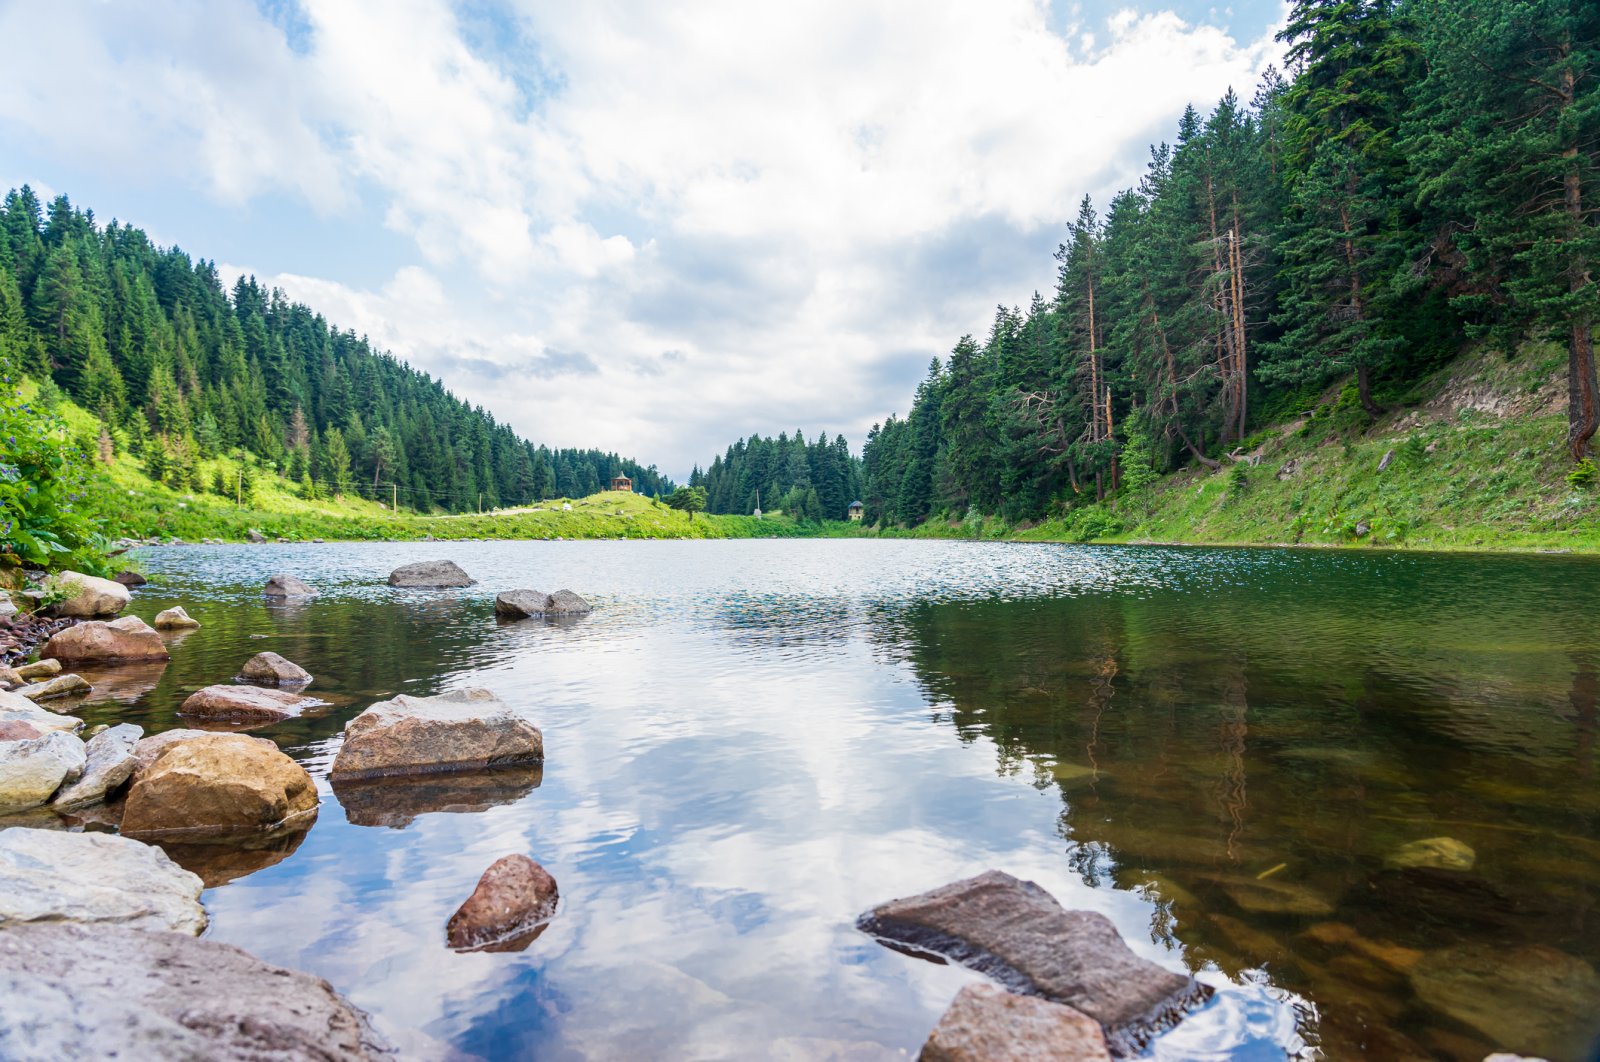 Artvin is one of the greenest provinces in Turkey. (iStock Photo)